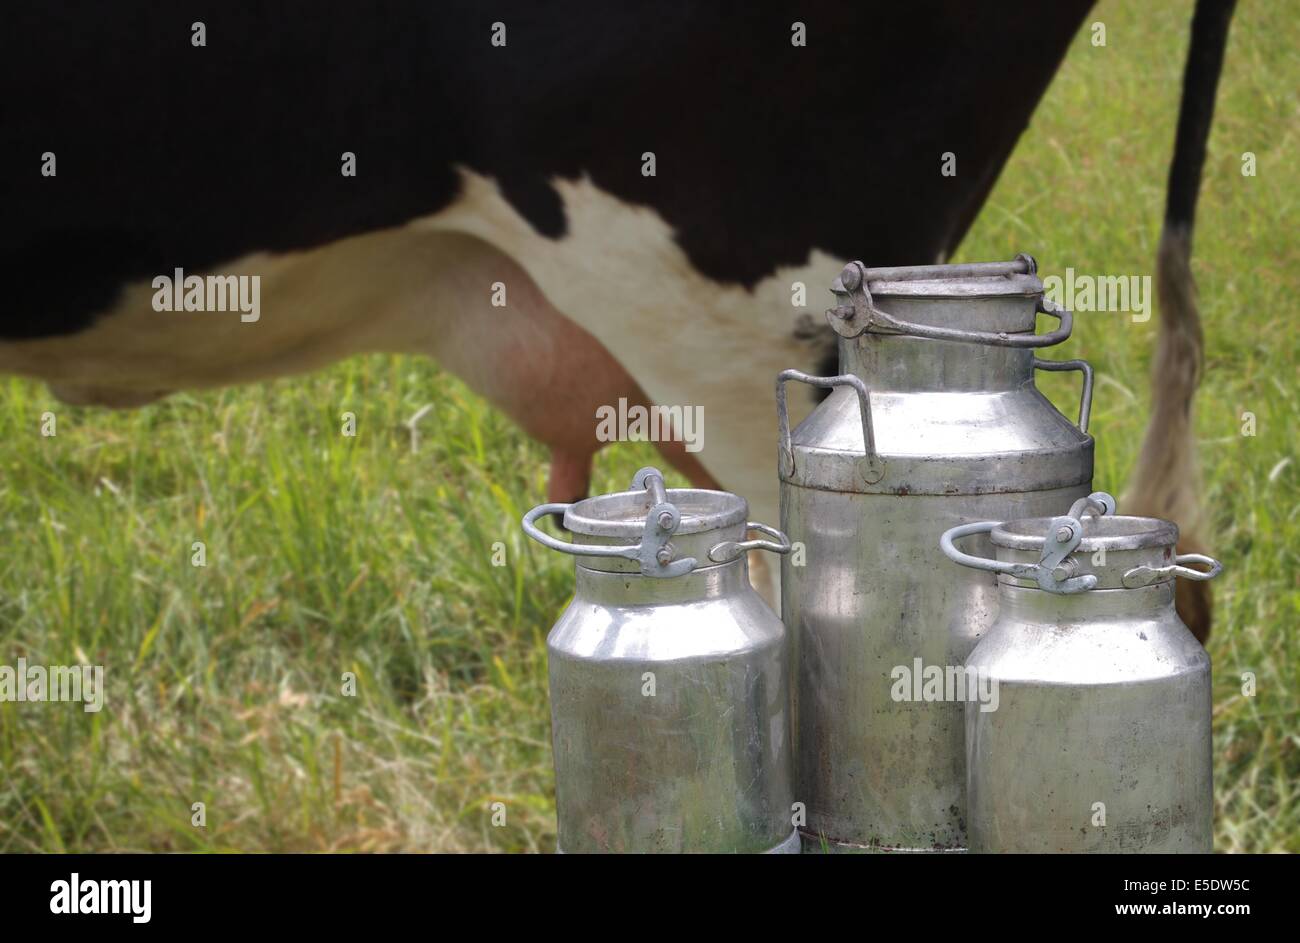 they three metal cans on milk on cow background Stock Photo